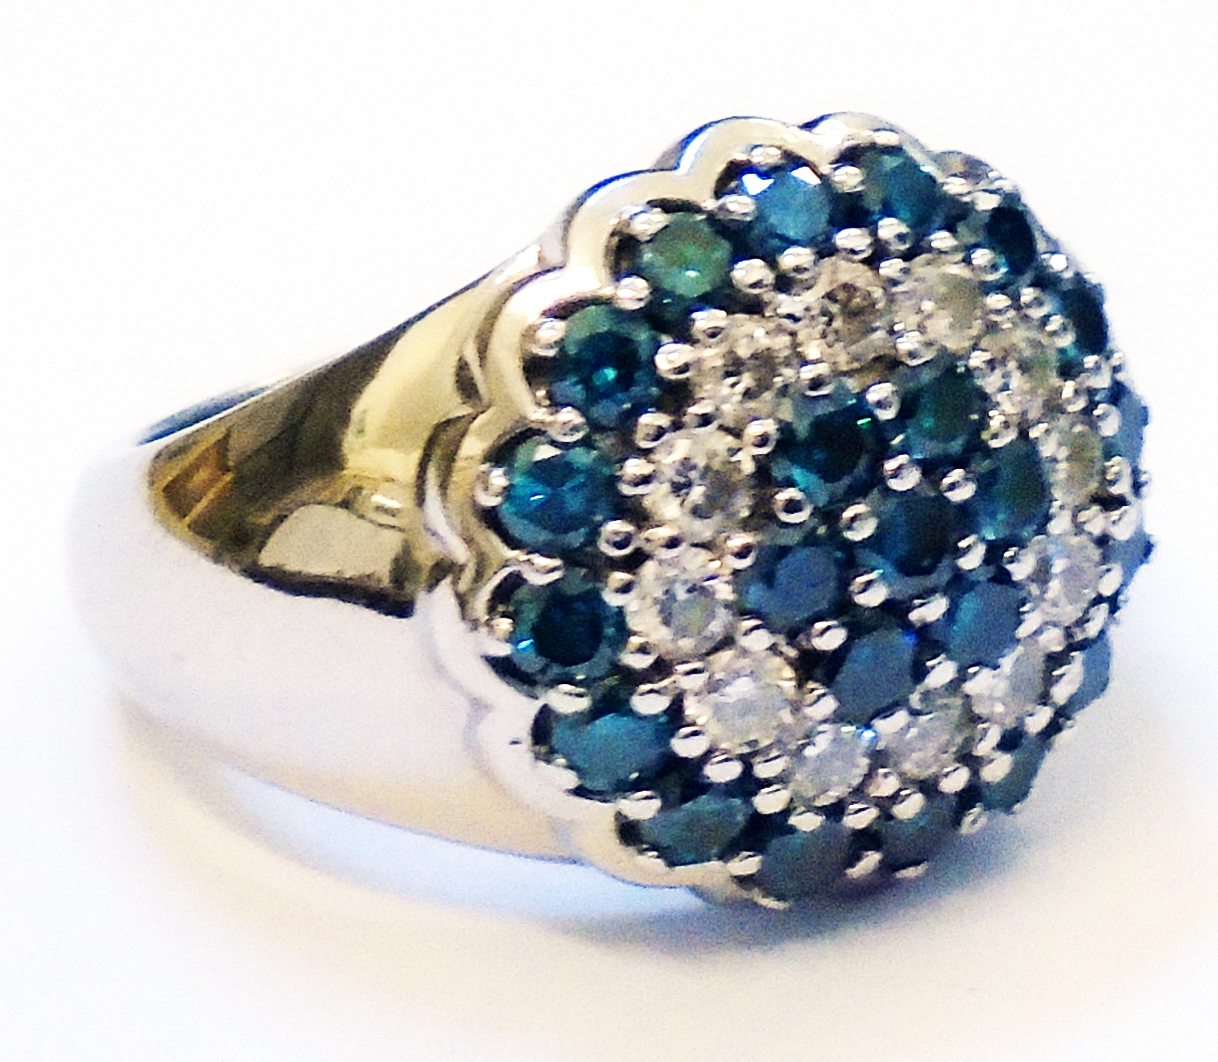 A marked 14k white metal ring, set with a blue and white diamond encrusted central panel